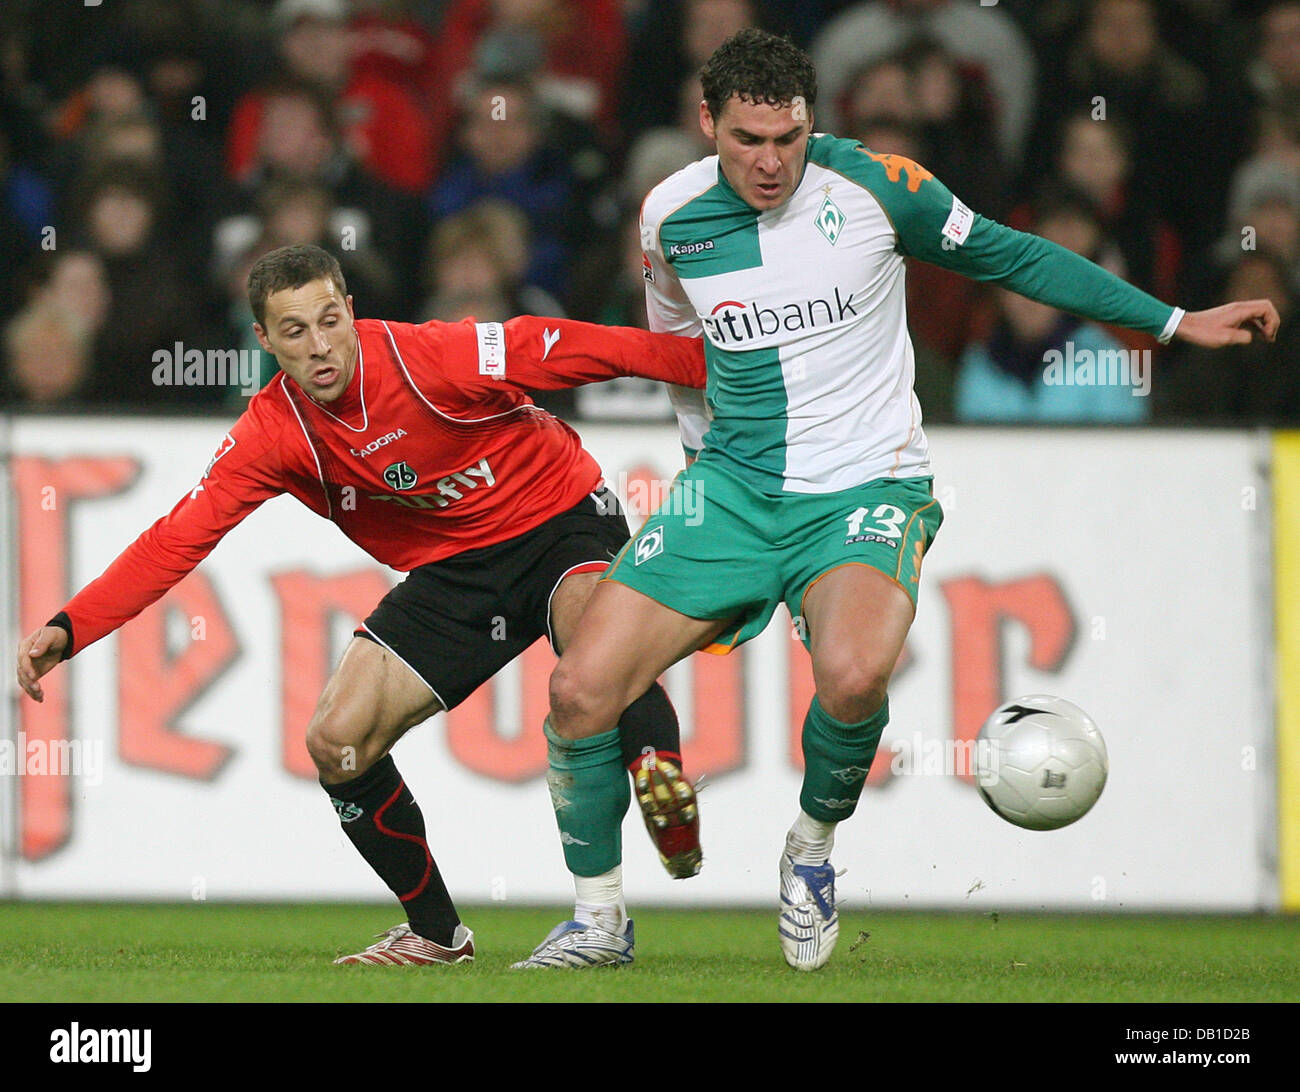 Steven Cerundolo (L) of Hanover vies for the ball with Dusko Tosic of Bremen during the Bundesliga match Hanover 96 vs Werder Bremen at AWD-Arena stadium in Hanover, Germany, 08 December 2007. Hanover defeated Bremen 4-3. Photo: Friso Gentsch Stock Photo